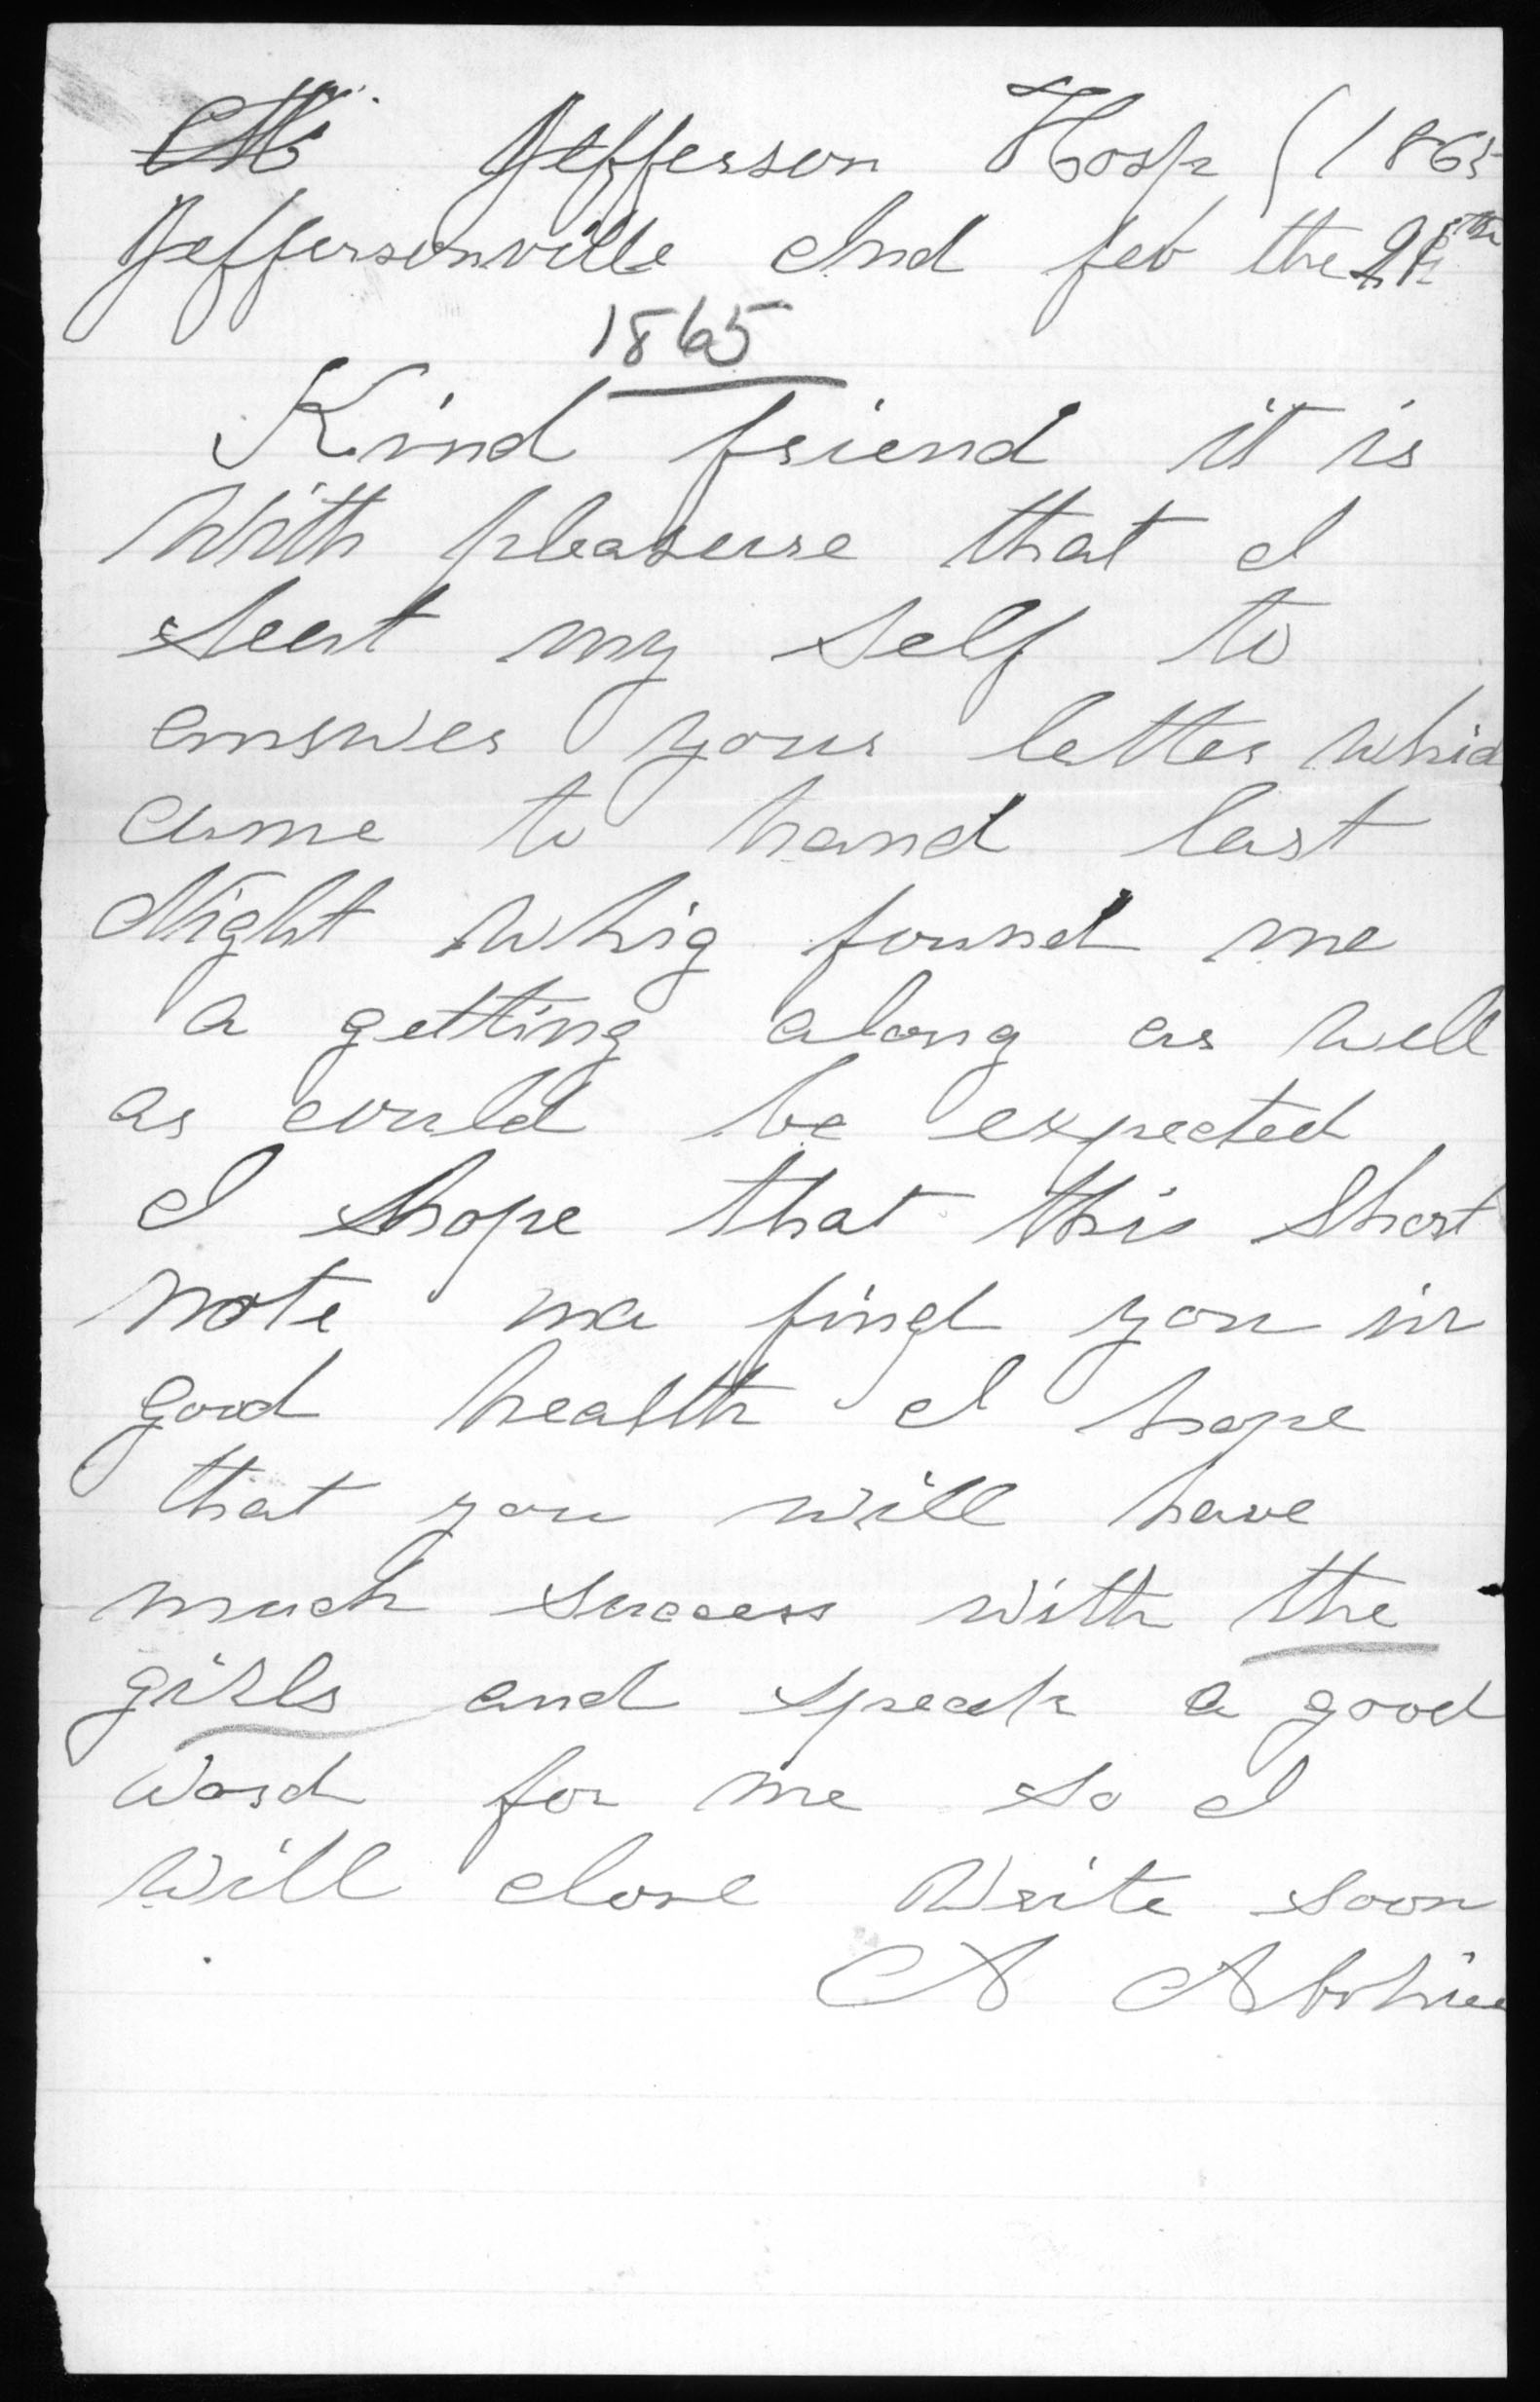 Letter, Alfred Abshier, Jeffersonville, Indiana, to Henry J. Parker